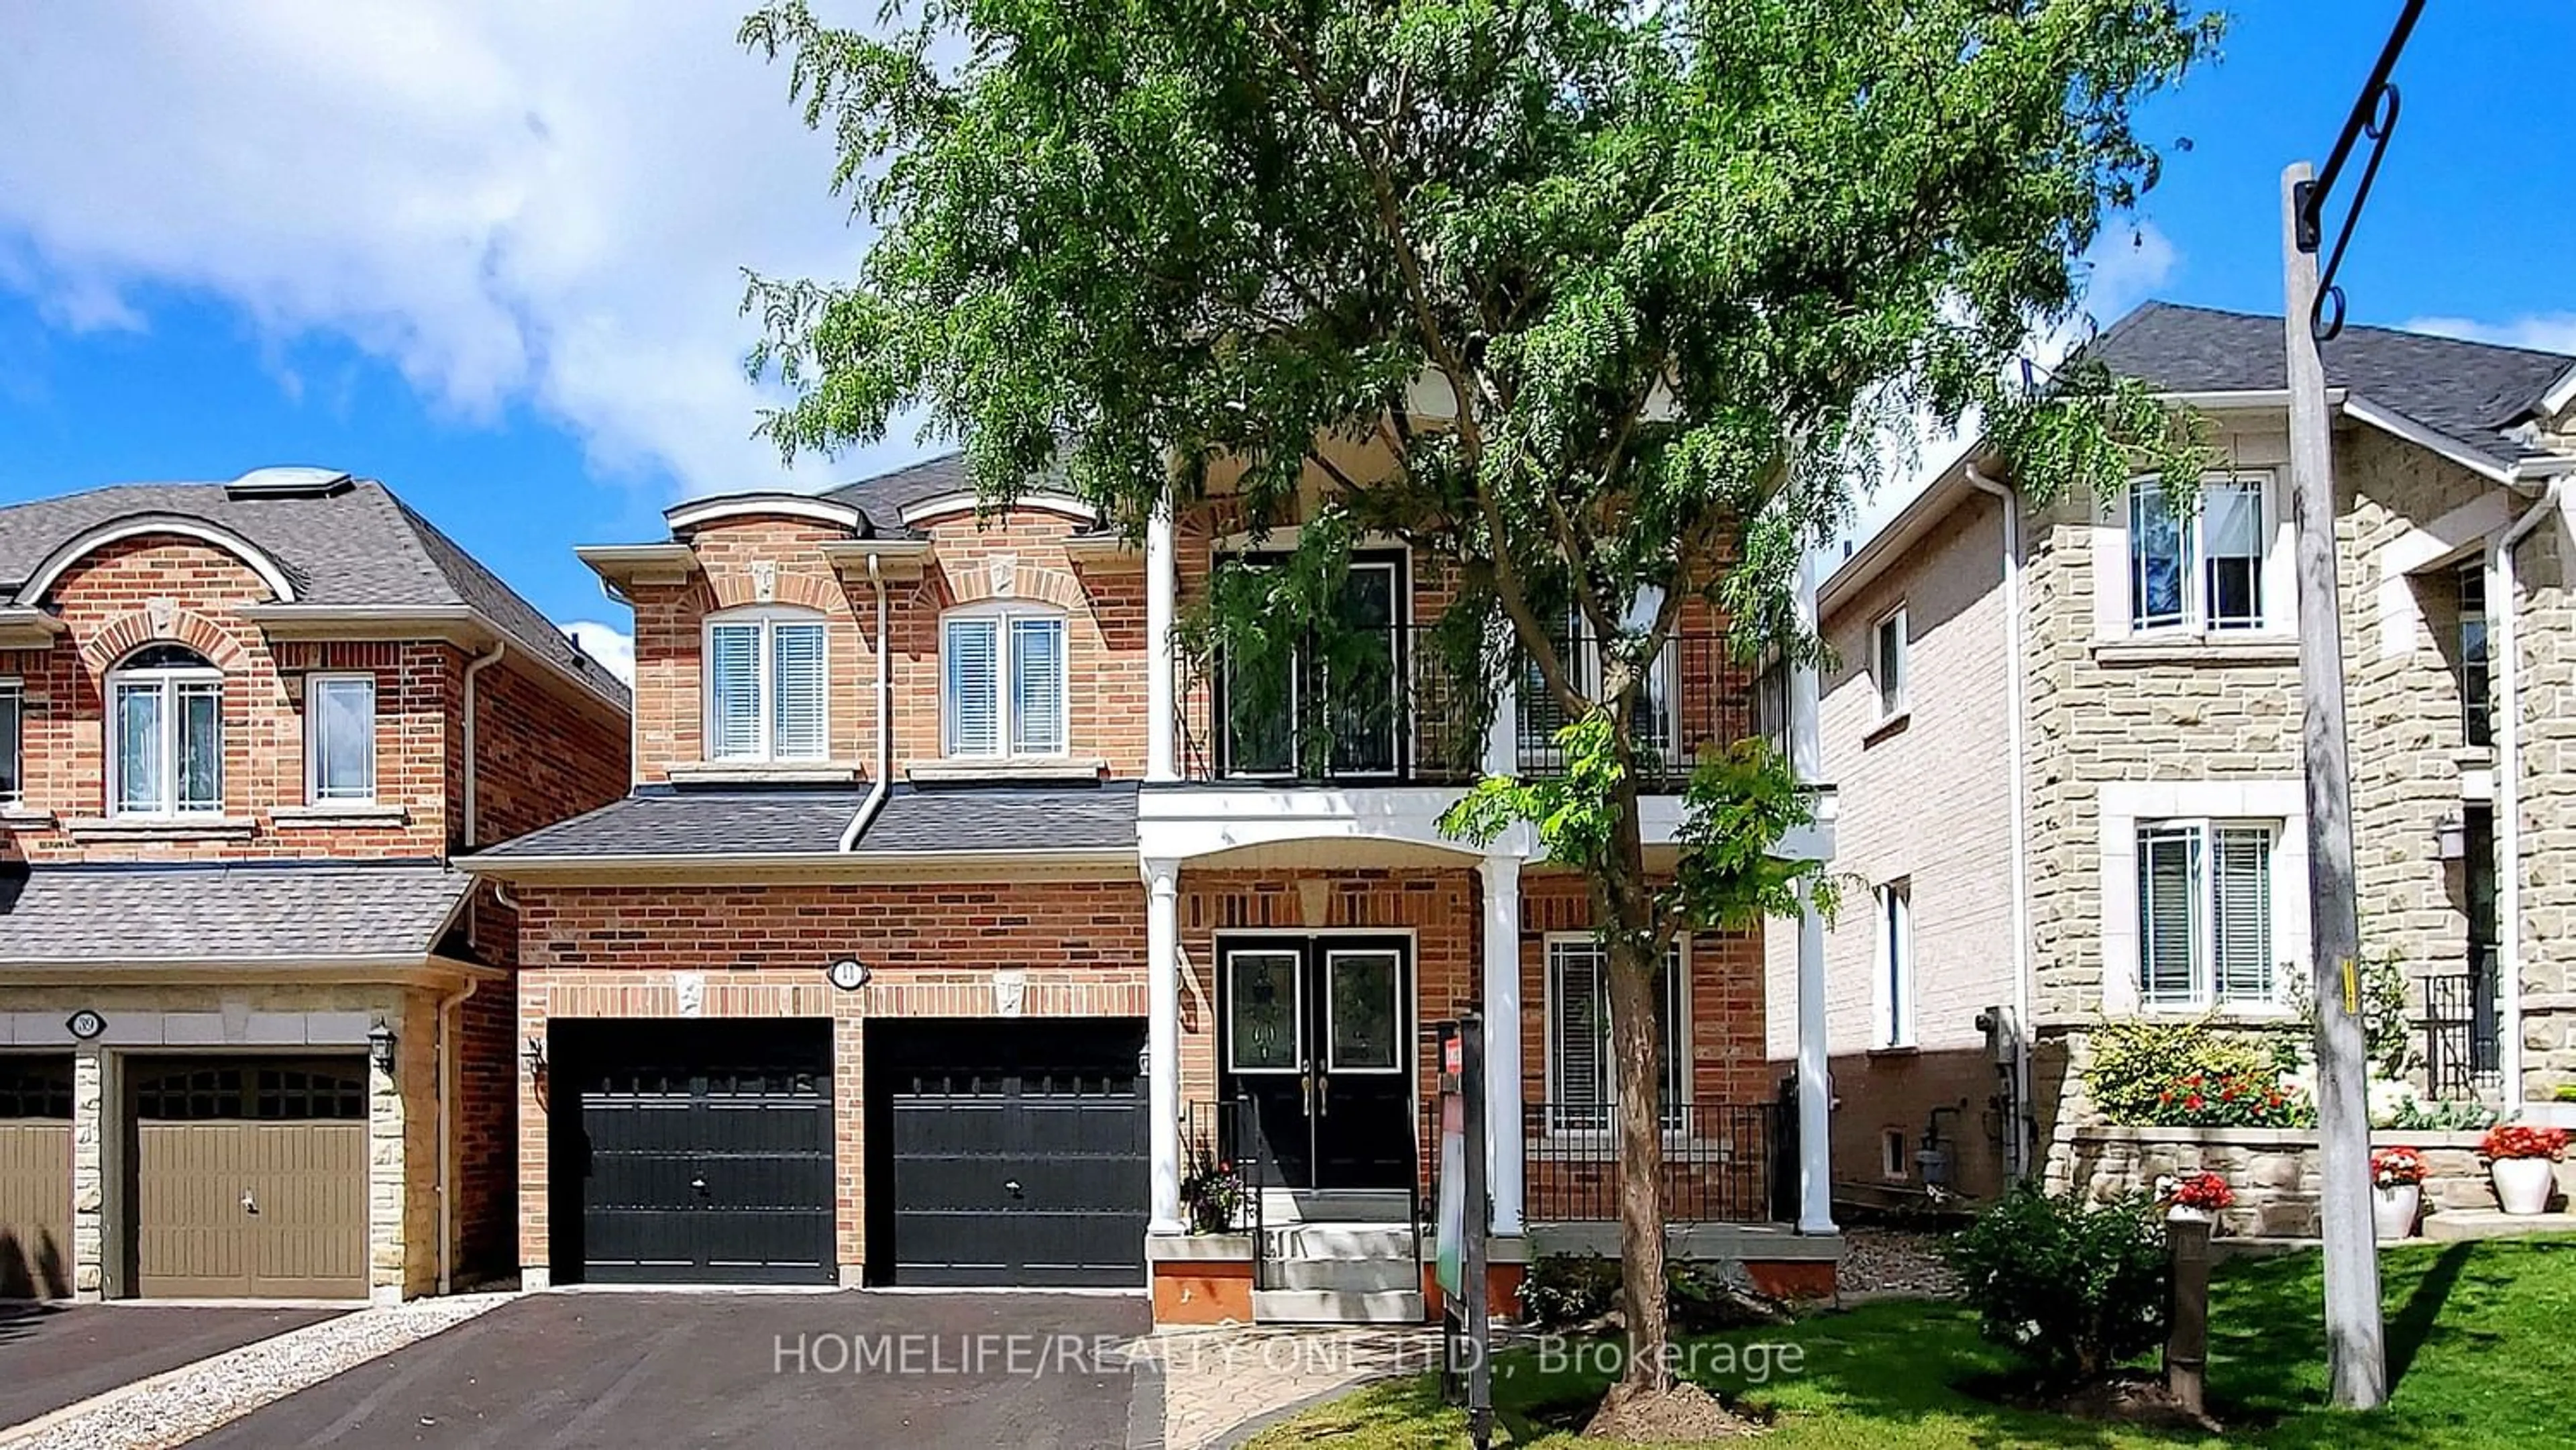 Home with brick exterior material for 41 Carberry Cres, Ajax Ontario L1Z 1S1